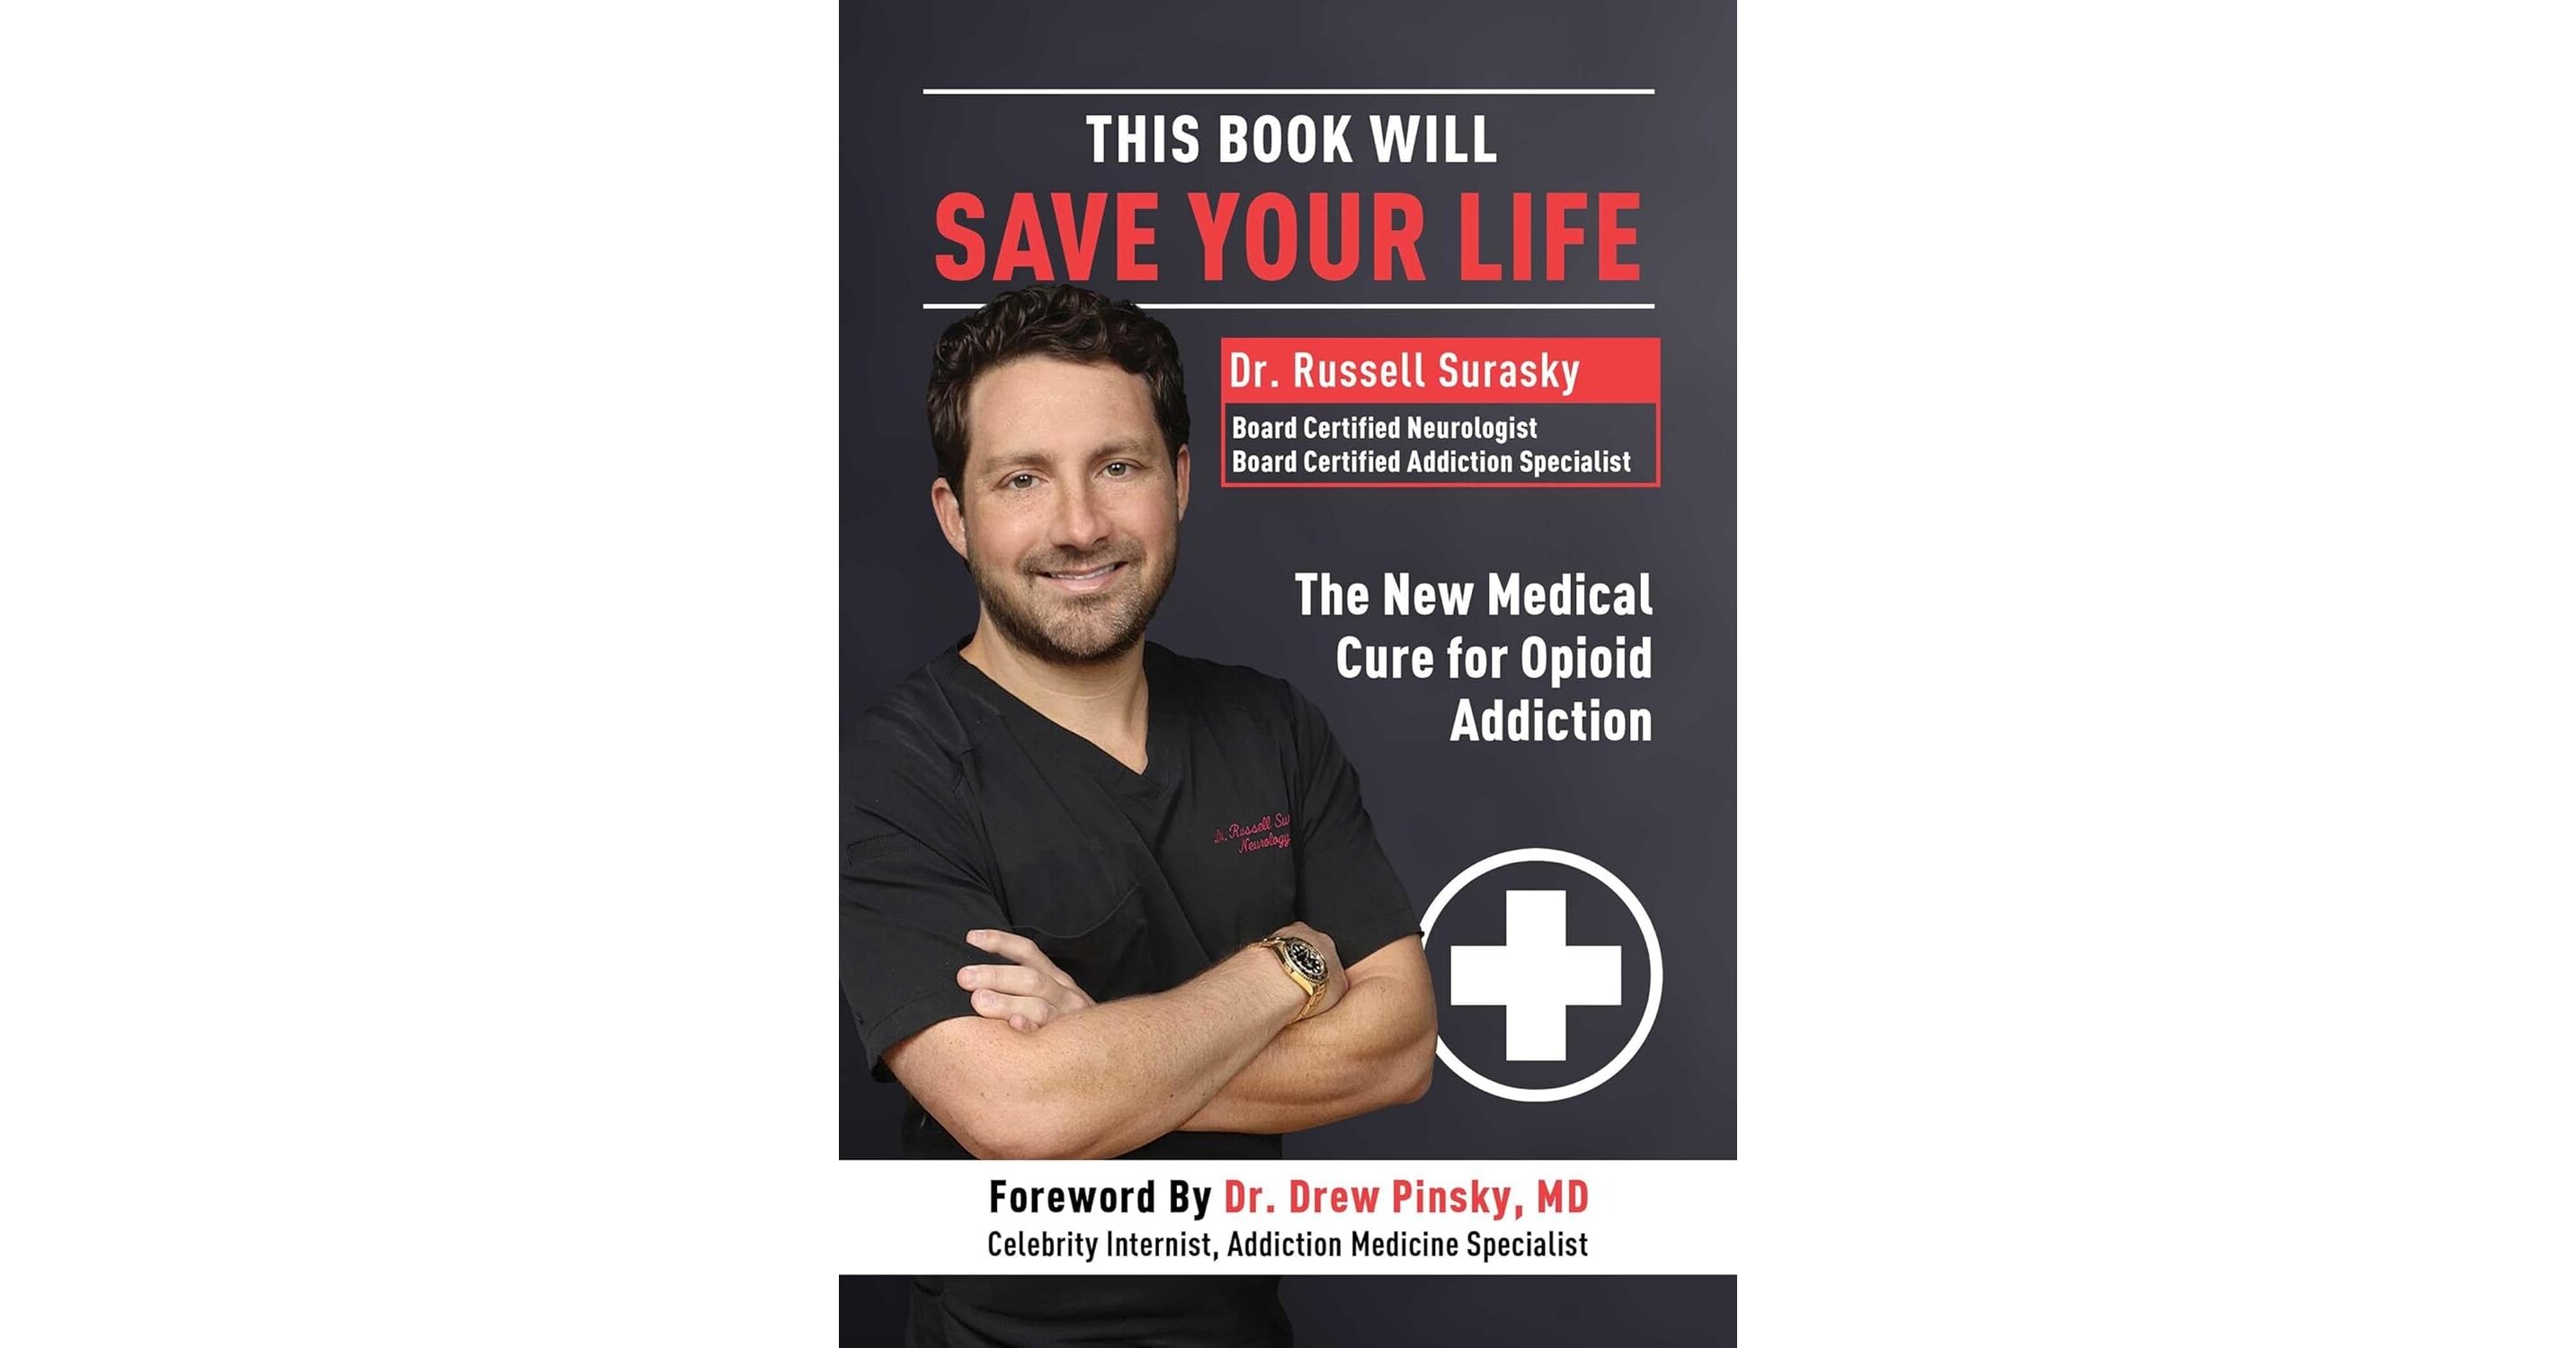 Renowned neurologist Dr. Surasky introduces his groundbreaking new book on Fox News and highlights the role of chiropractic in addiction treatment